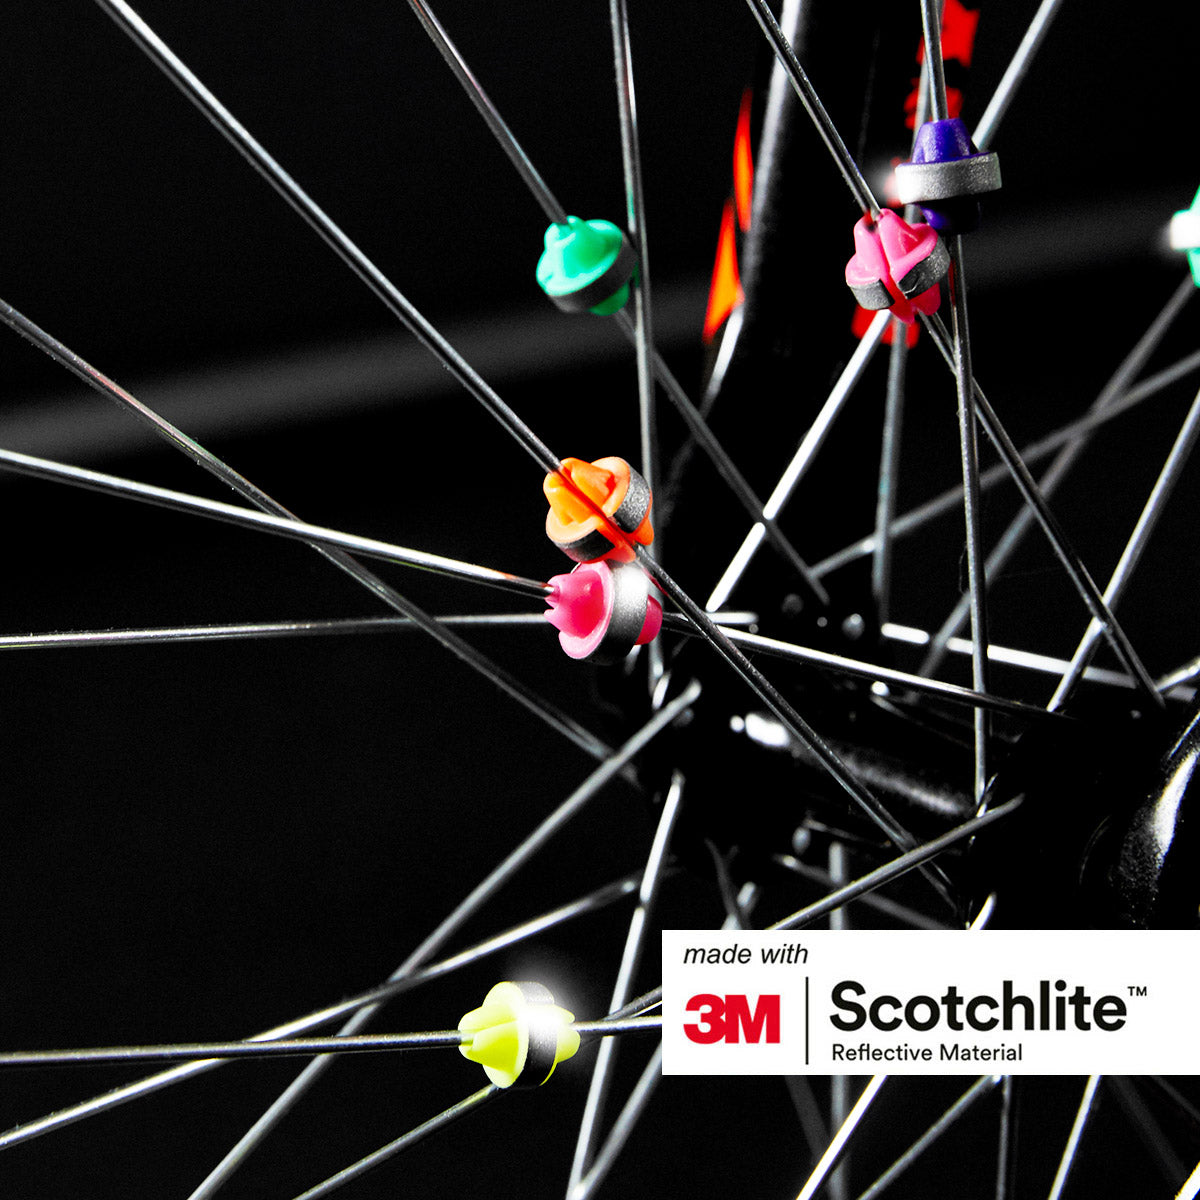 Close up of bike wheel spokes with different colored spoke beads on.